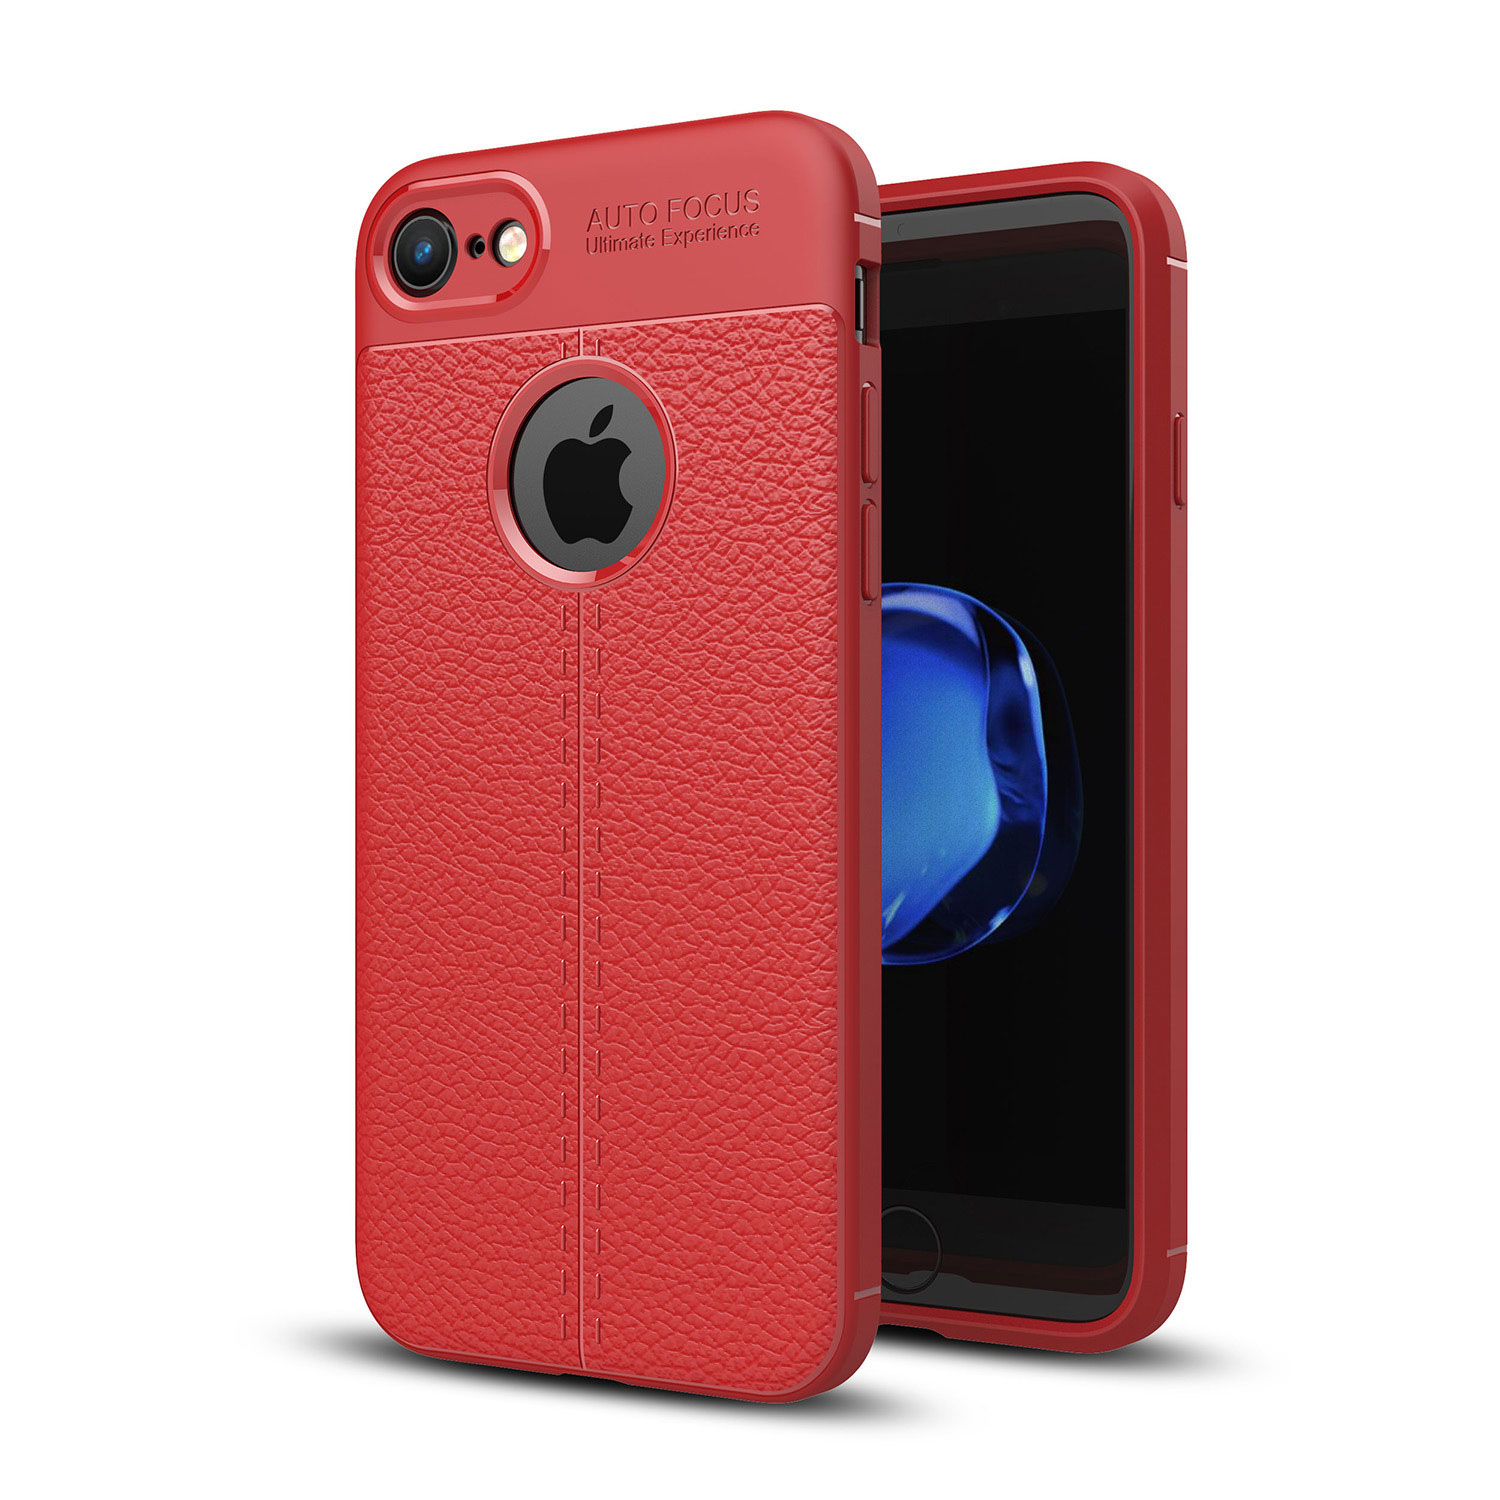 iPHONE 8 / iPHONE 7 TPU Leather Armor Hybrid Case (Red)